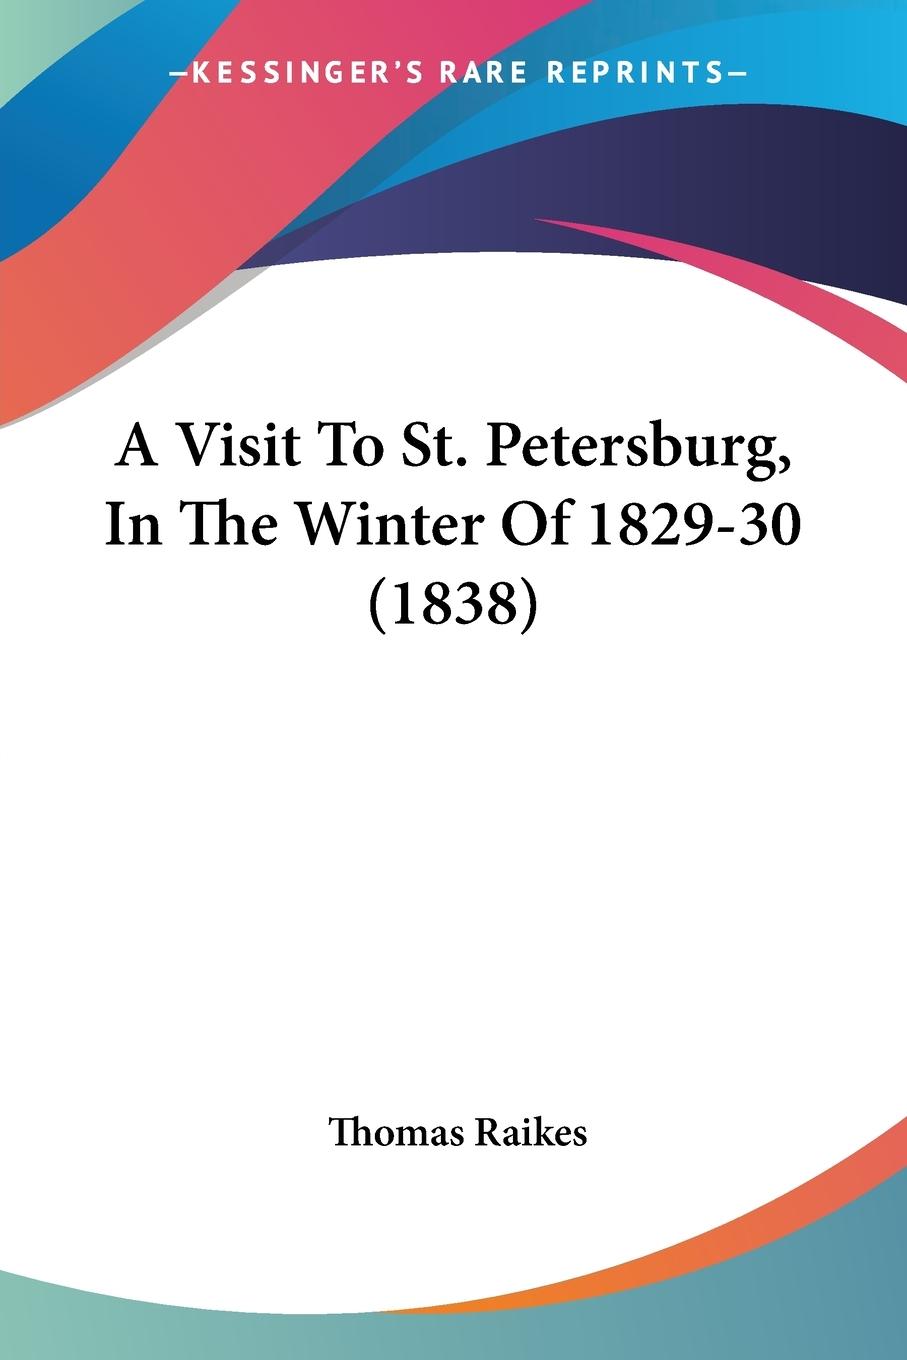 A Visit To St. Petersburg, In The Winter Of 1829-30 (1838) - Raikes, Thomas